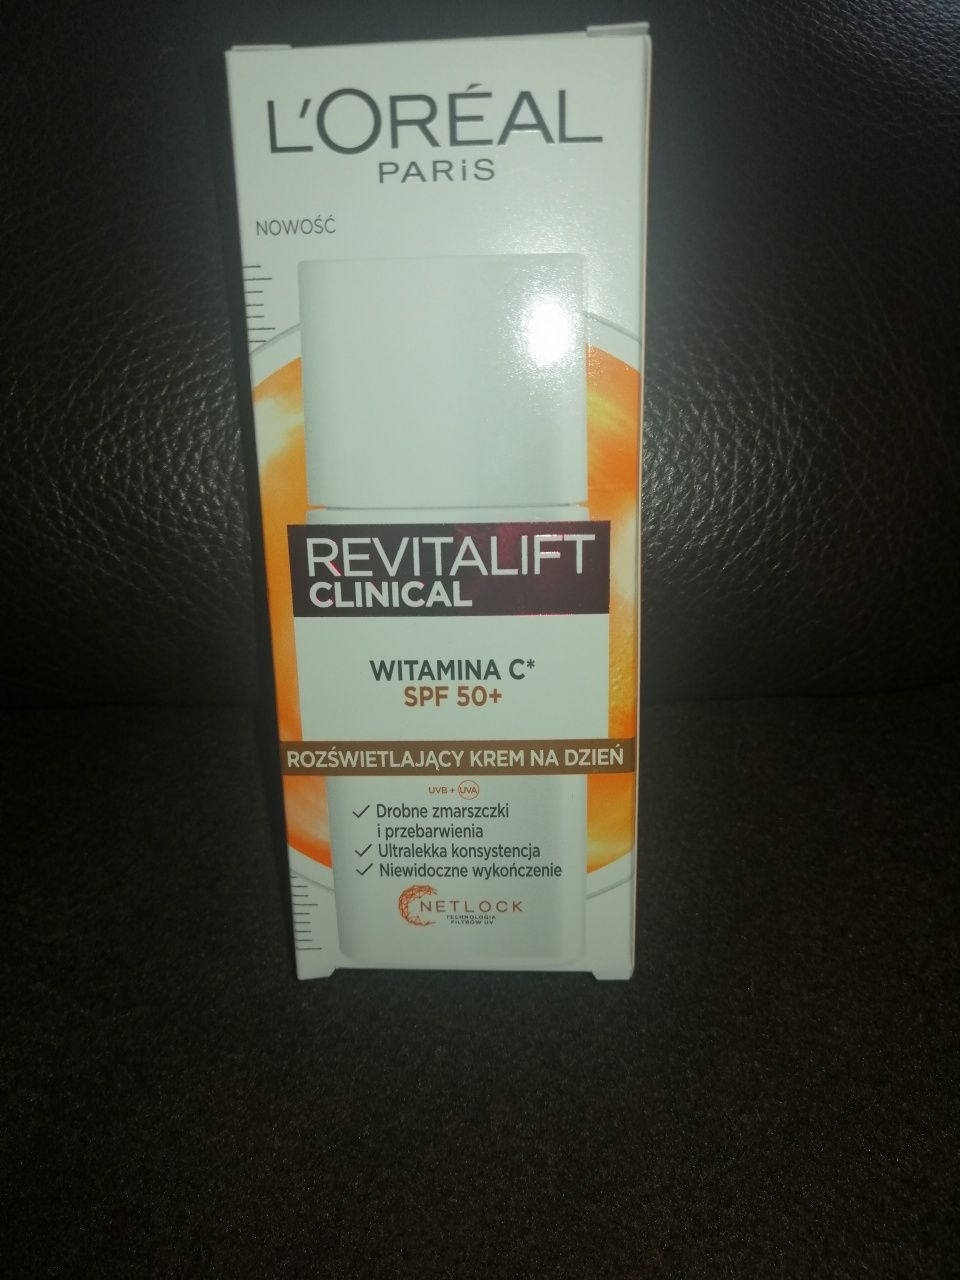 Loreal revitalift clinical SPF 50+